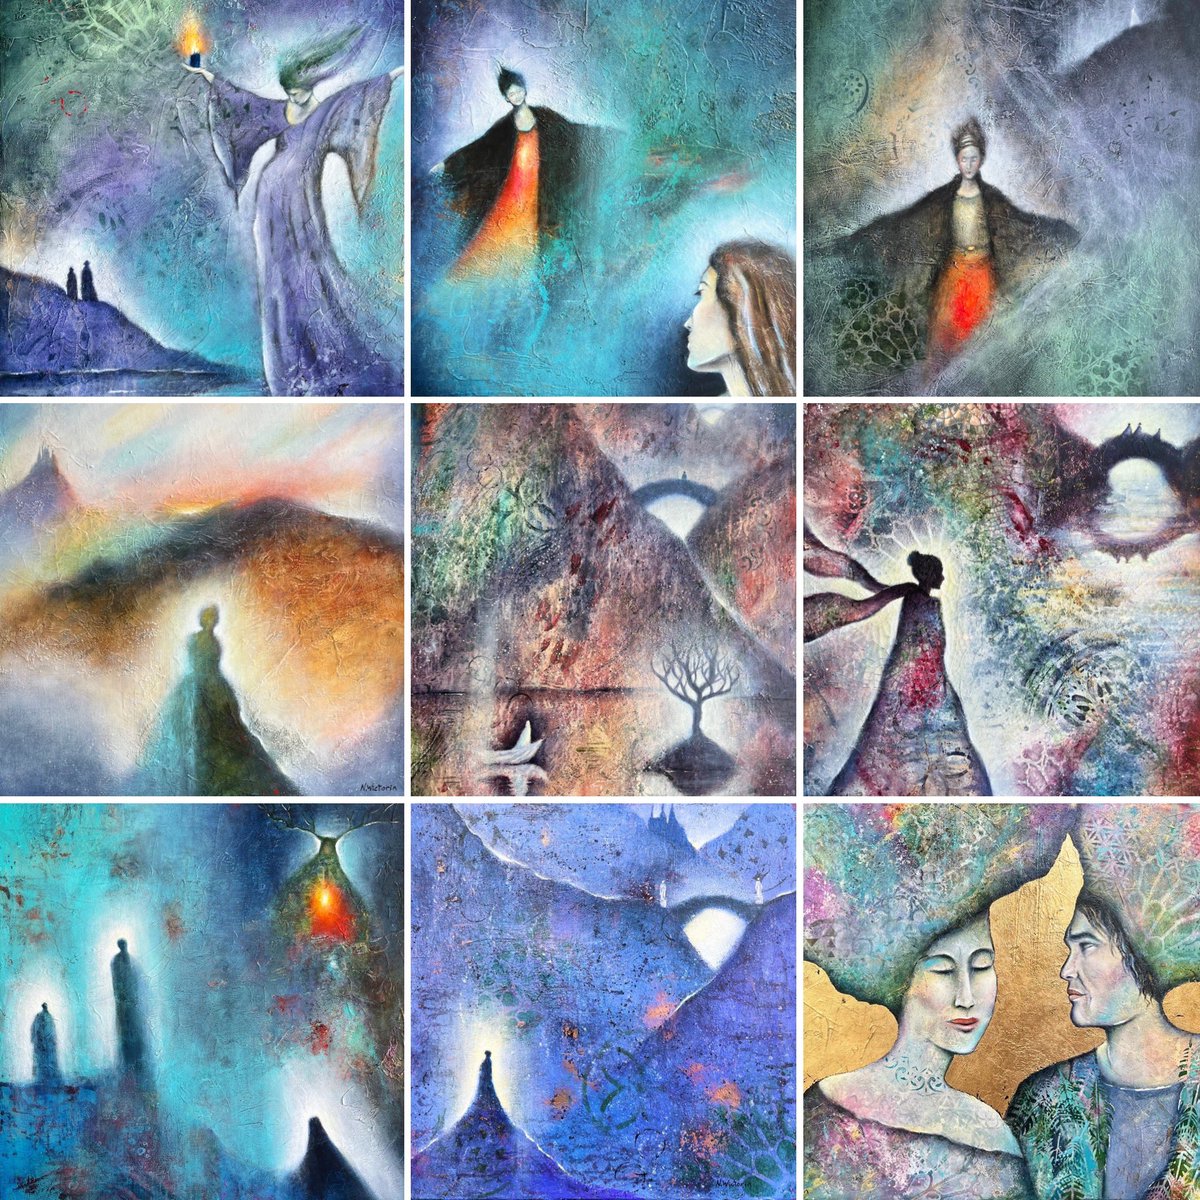 Some of my paintings from 2022 👩🏻‍🎨
#scandinavianartists #paintings #wallart #magicalart #dreamscapes #meditativeart #nordicart 
konst.se/ninawictorin